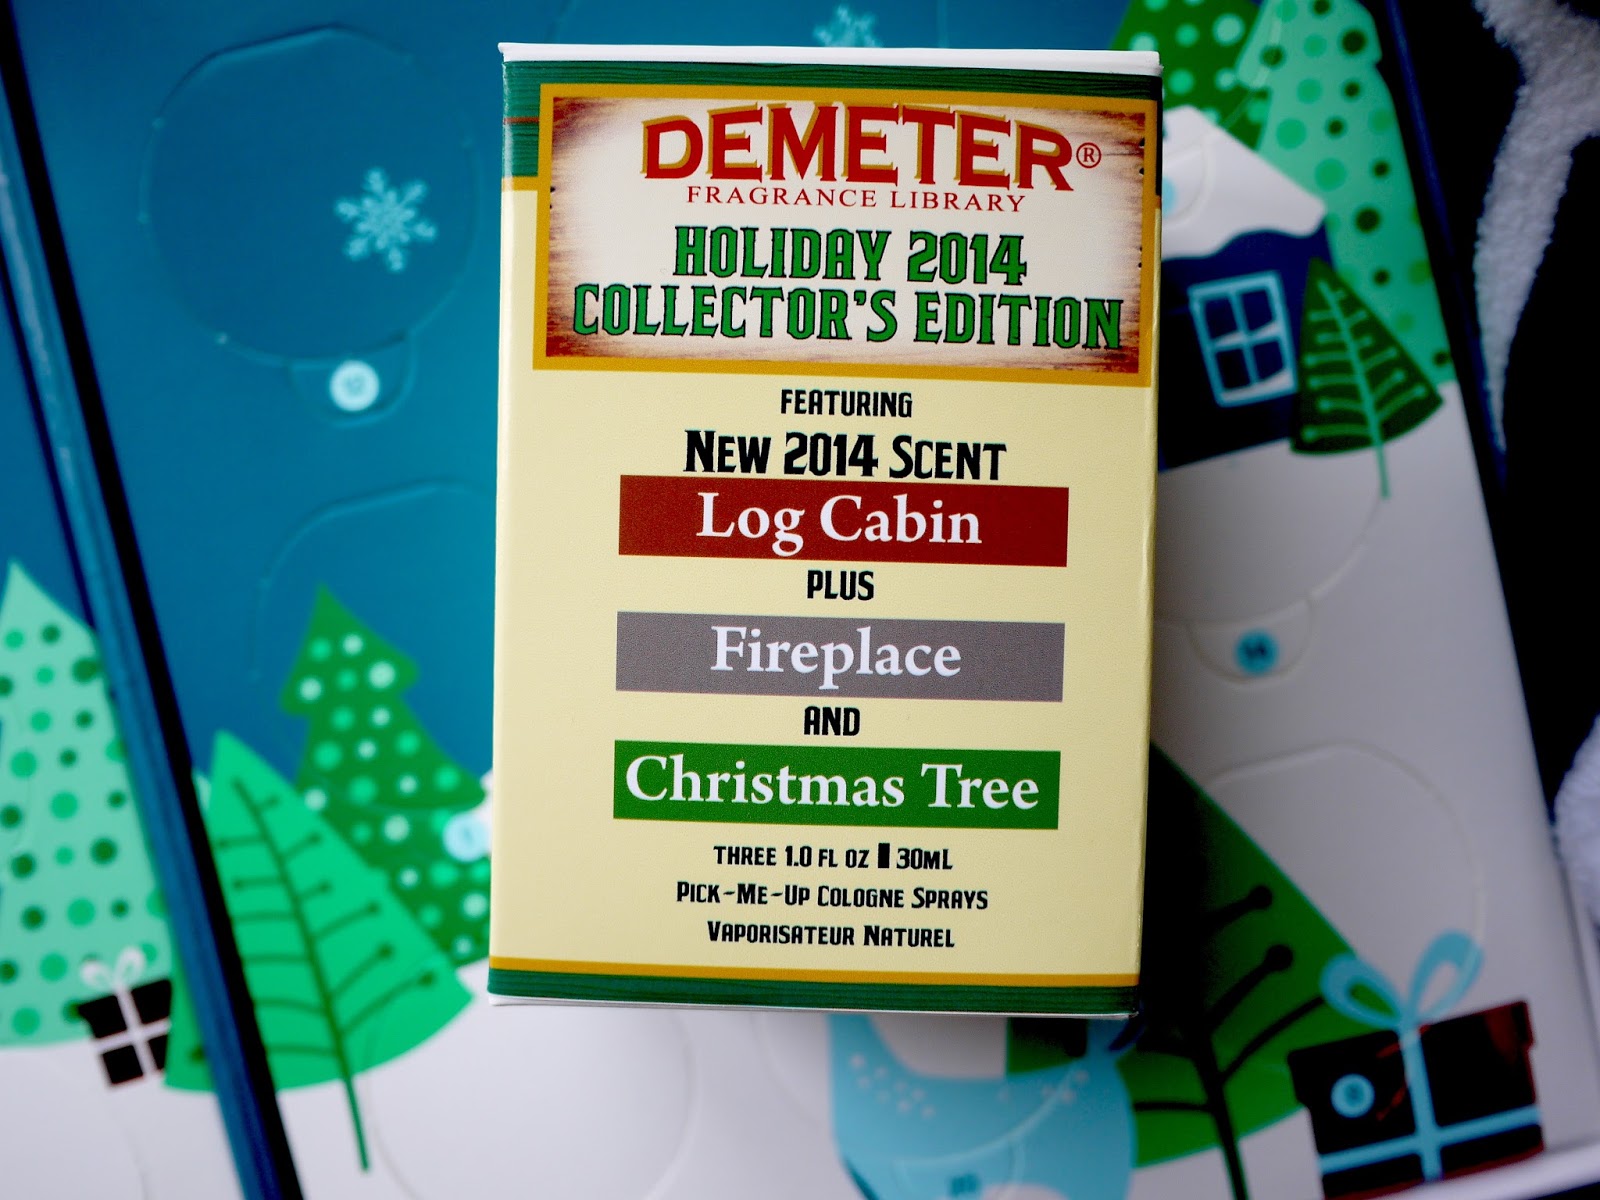 Demeter Holiday 2014 Collector's Edition christmas tree fireplace log cabin review